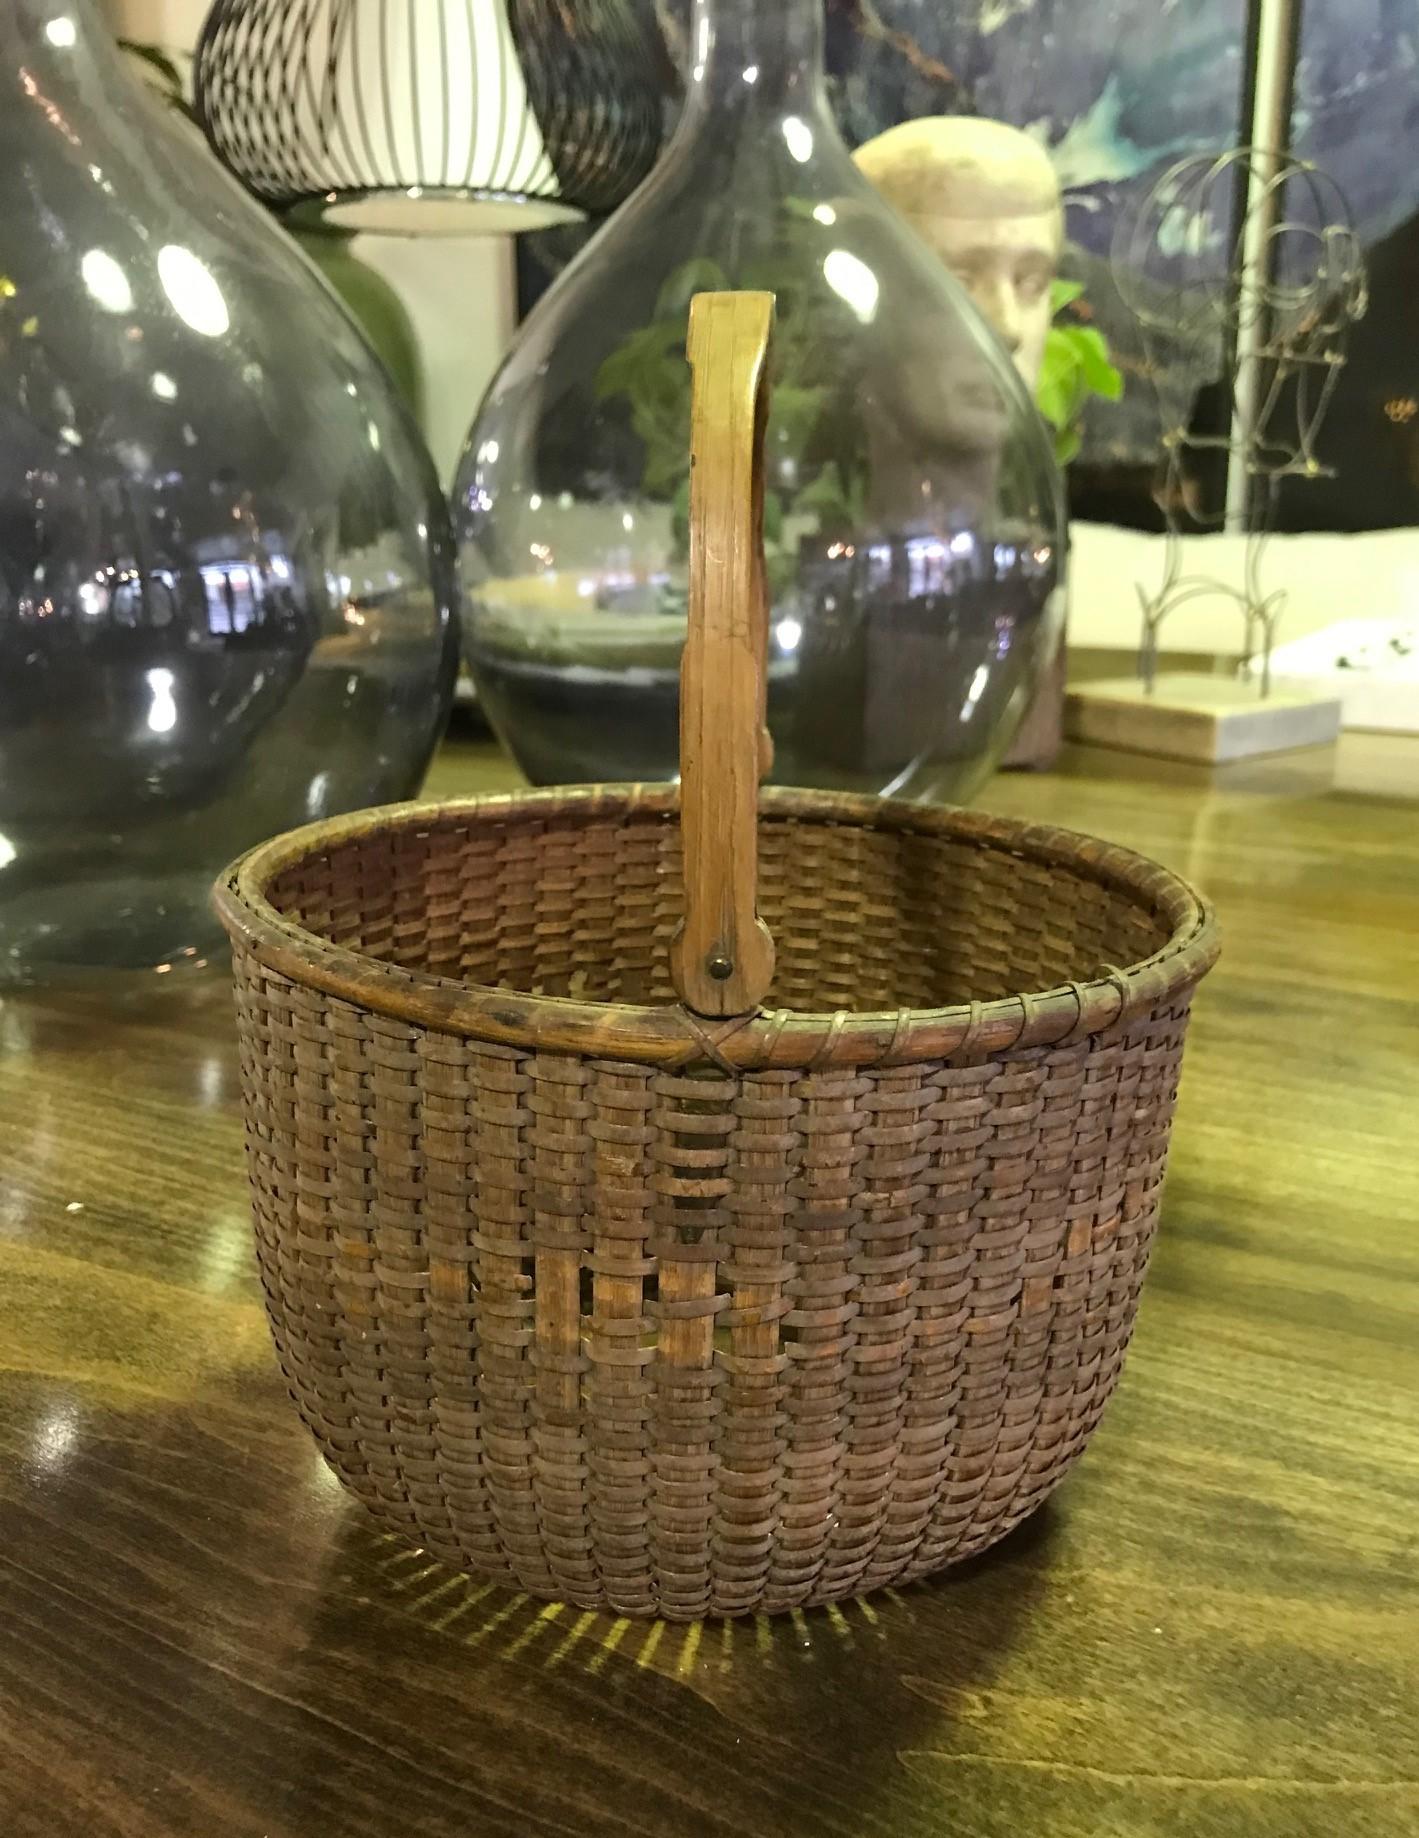 A wonderful and quite rare and hard to find nantucket lightship basket by Davis Hall, (1828-1906). Hall's baskets are prized by collectors of lightship baskets worldwide. This basket is made with his traditional swing handle and rounded lollipop